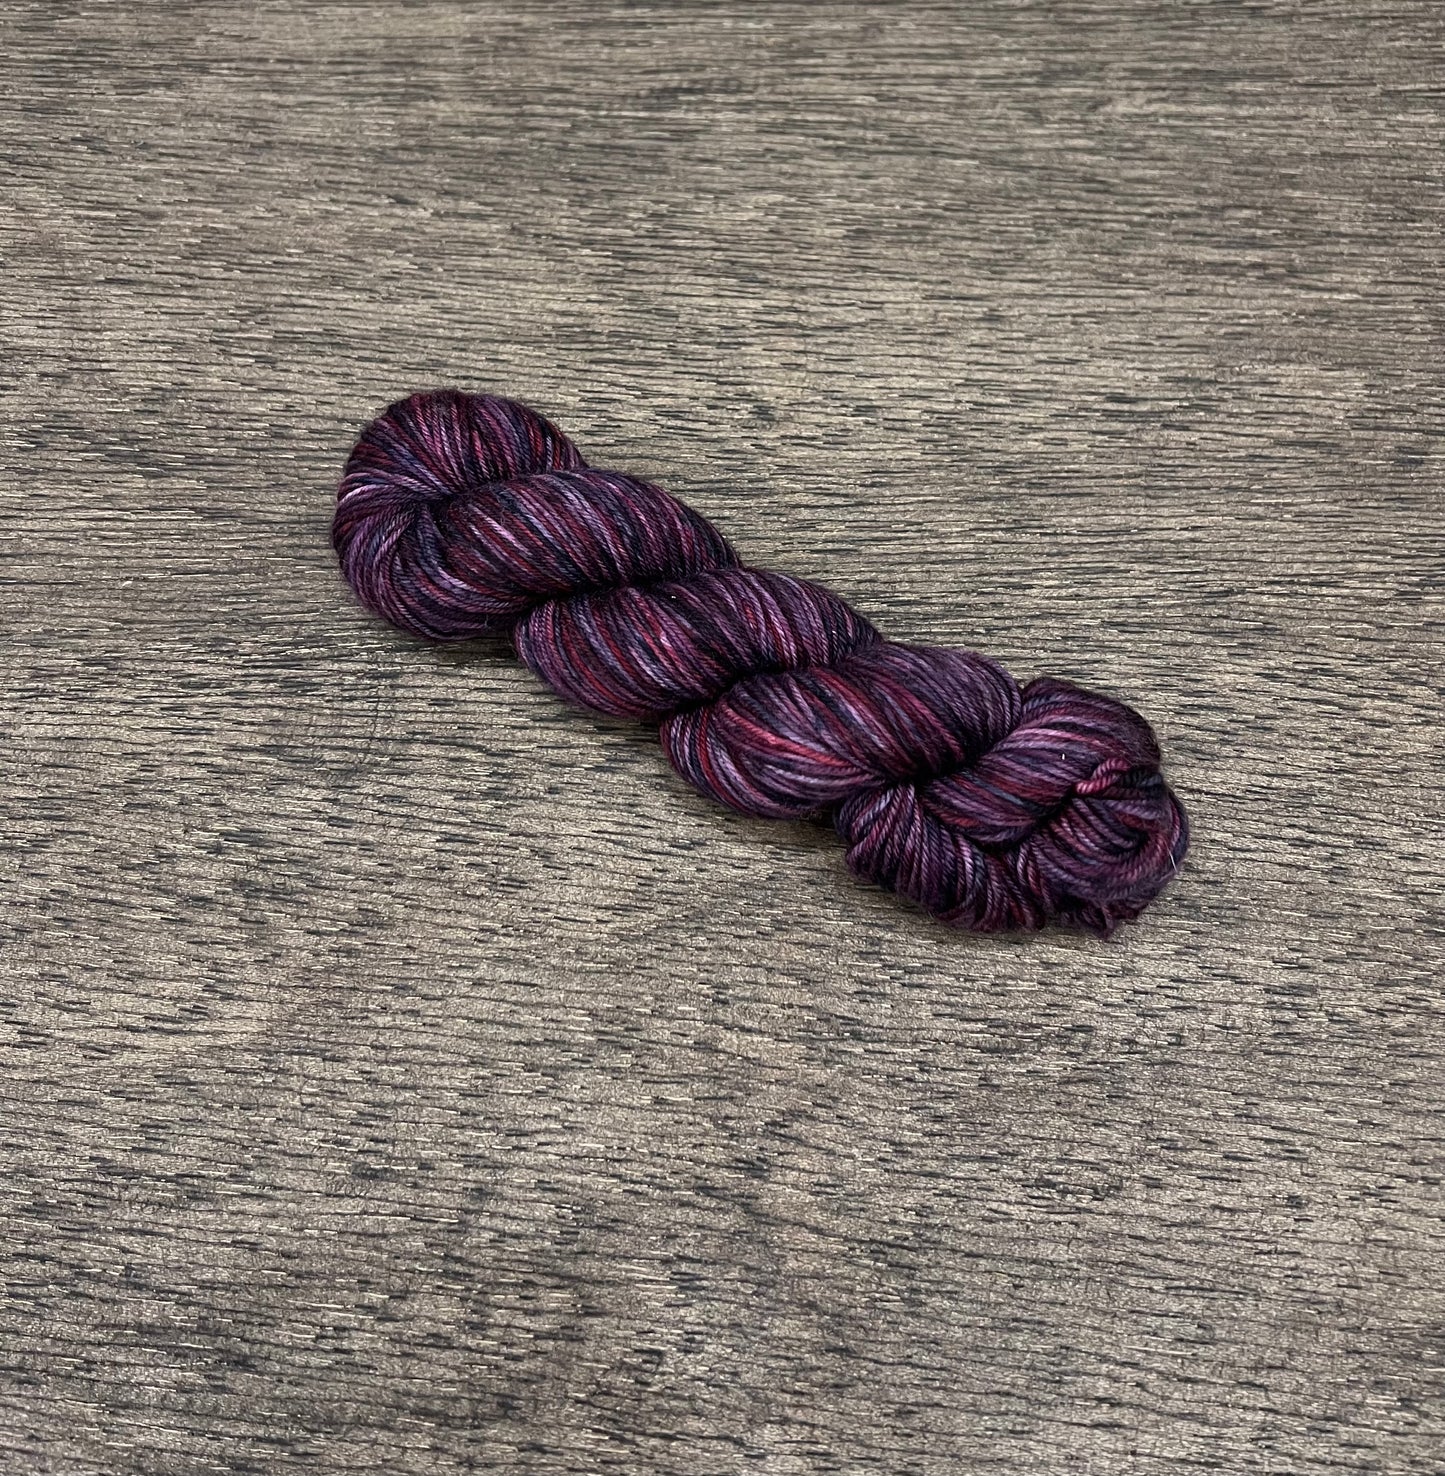 Yarn Club Monthly Yarn Subscription - Discovery of Witches Inspired SEPTEMBER